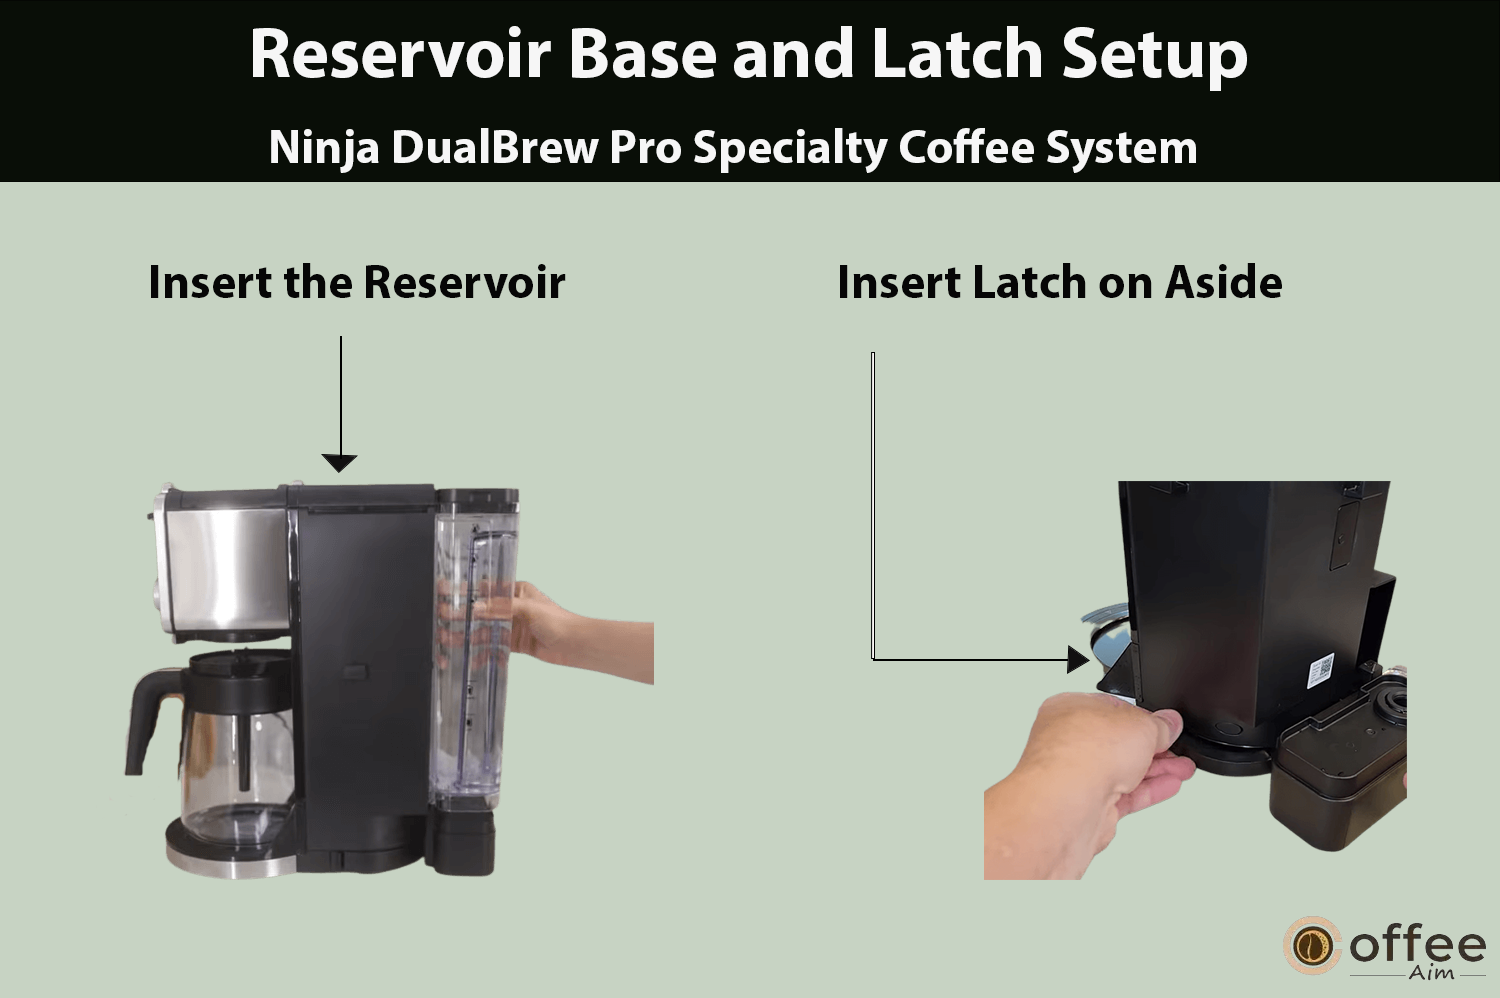 "This image depicts the sequential steps for the Ninja DualBrew Pro Specialty Coffee System: first, inserting the reservoir at the back, followed by attaching the latch on the side, as detailed in the article 'How to Use Ninja DualBrew Pro Specialty Coffee System, Compatible with K-Cup Pods, and 12-Cup Drip Coffee Maker?'"